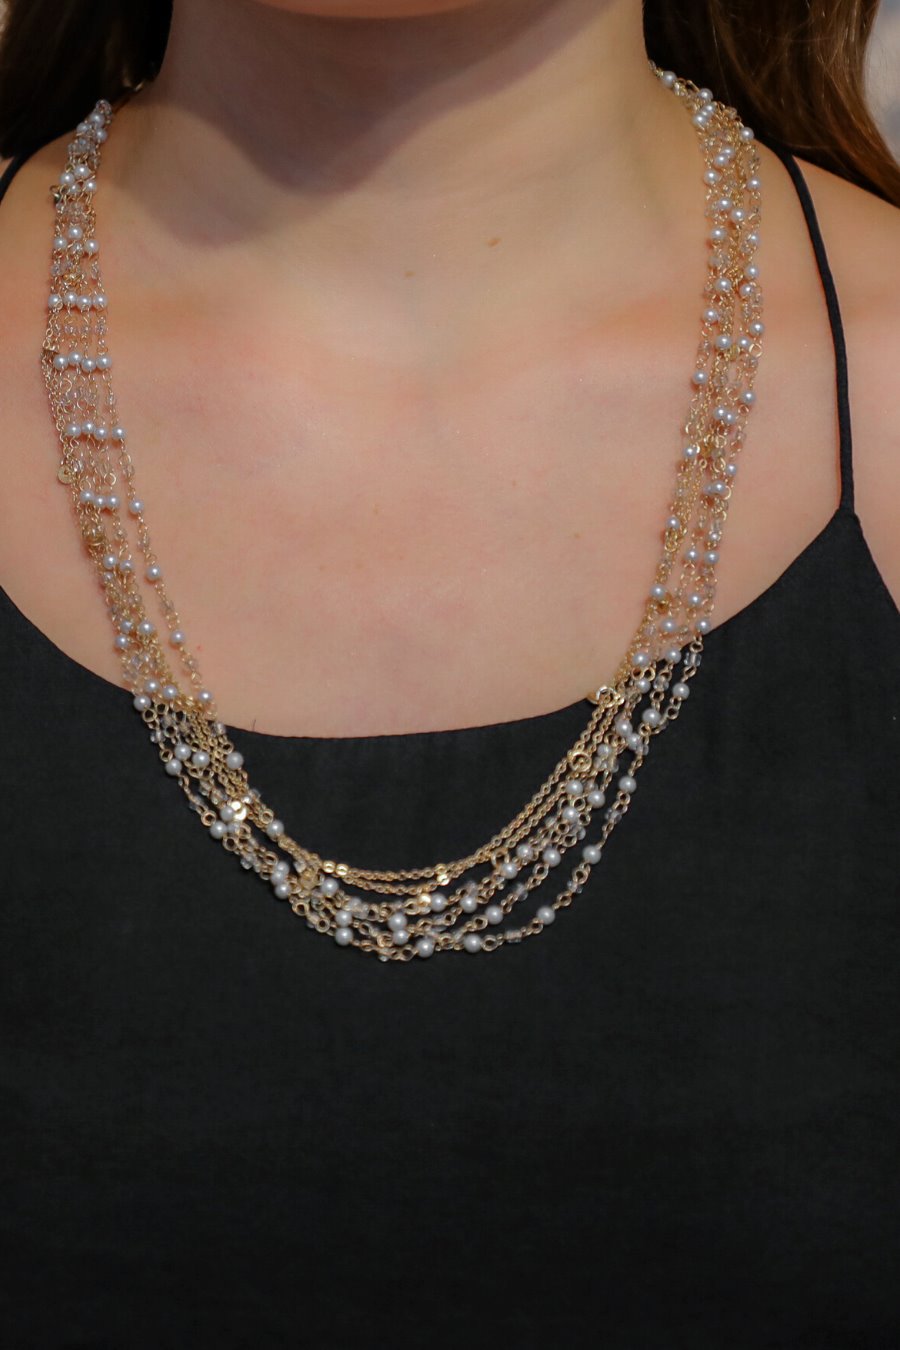 Girls Love Pearls Layered Necklace